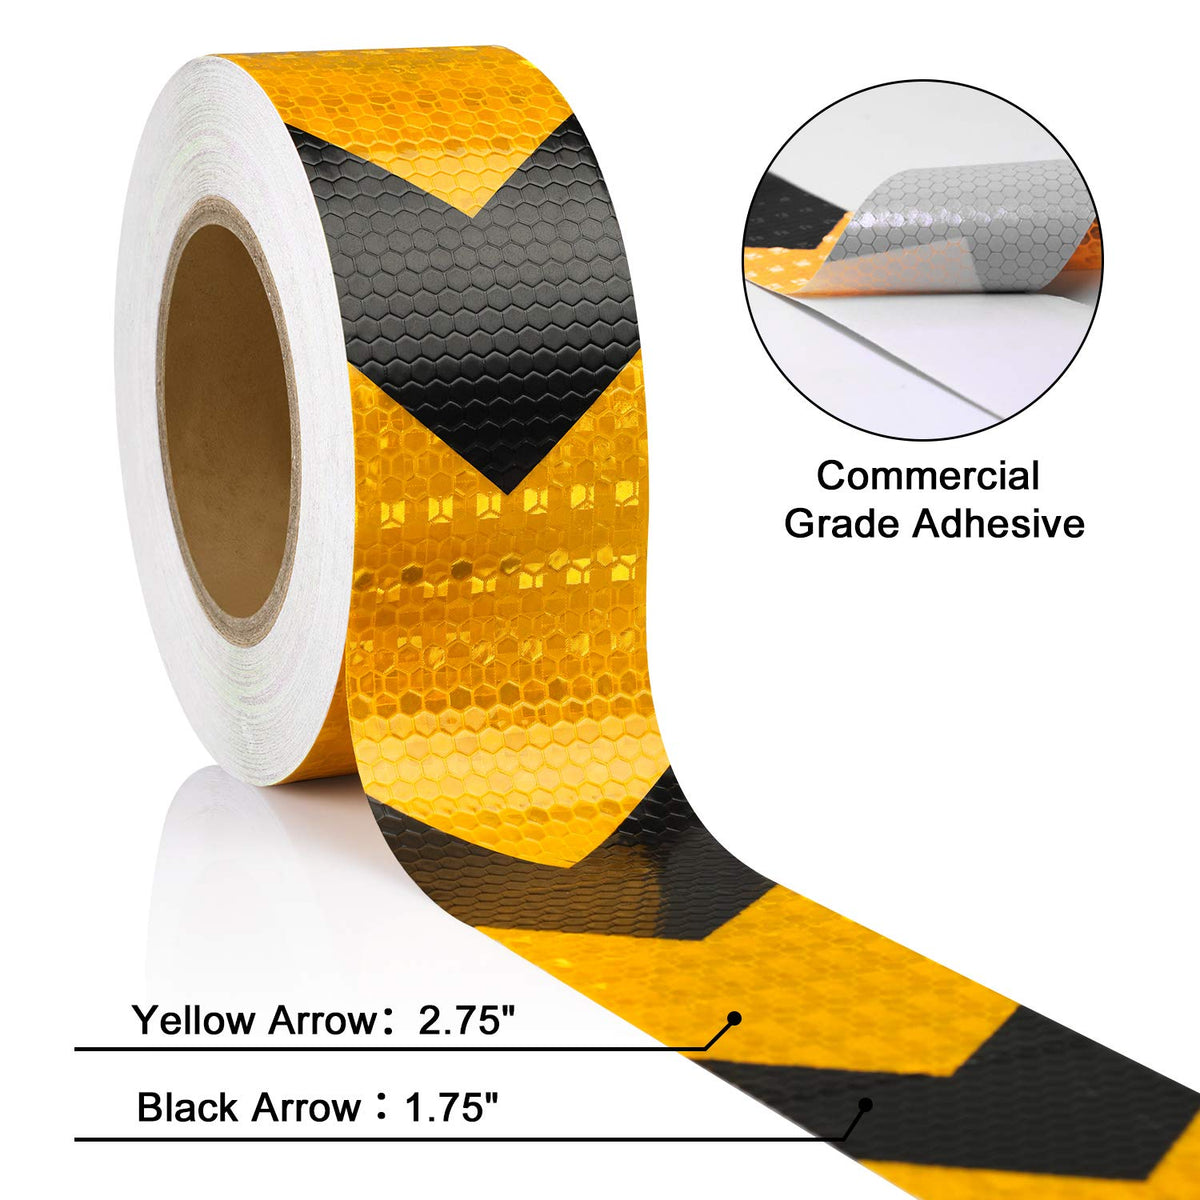 SAFETY REFLECTIVE SHINNING STAR FILM WARNING TAPE STICKERS (50MM X